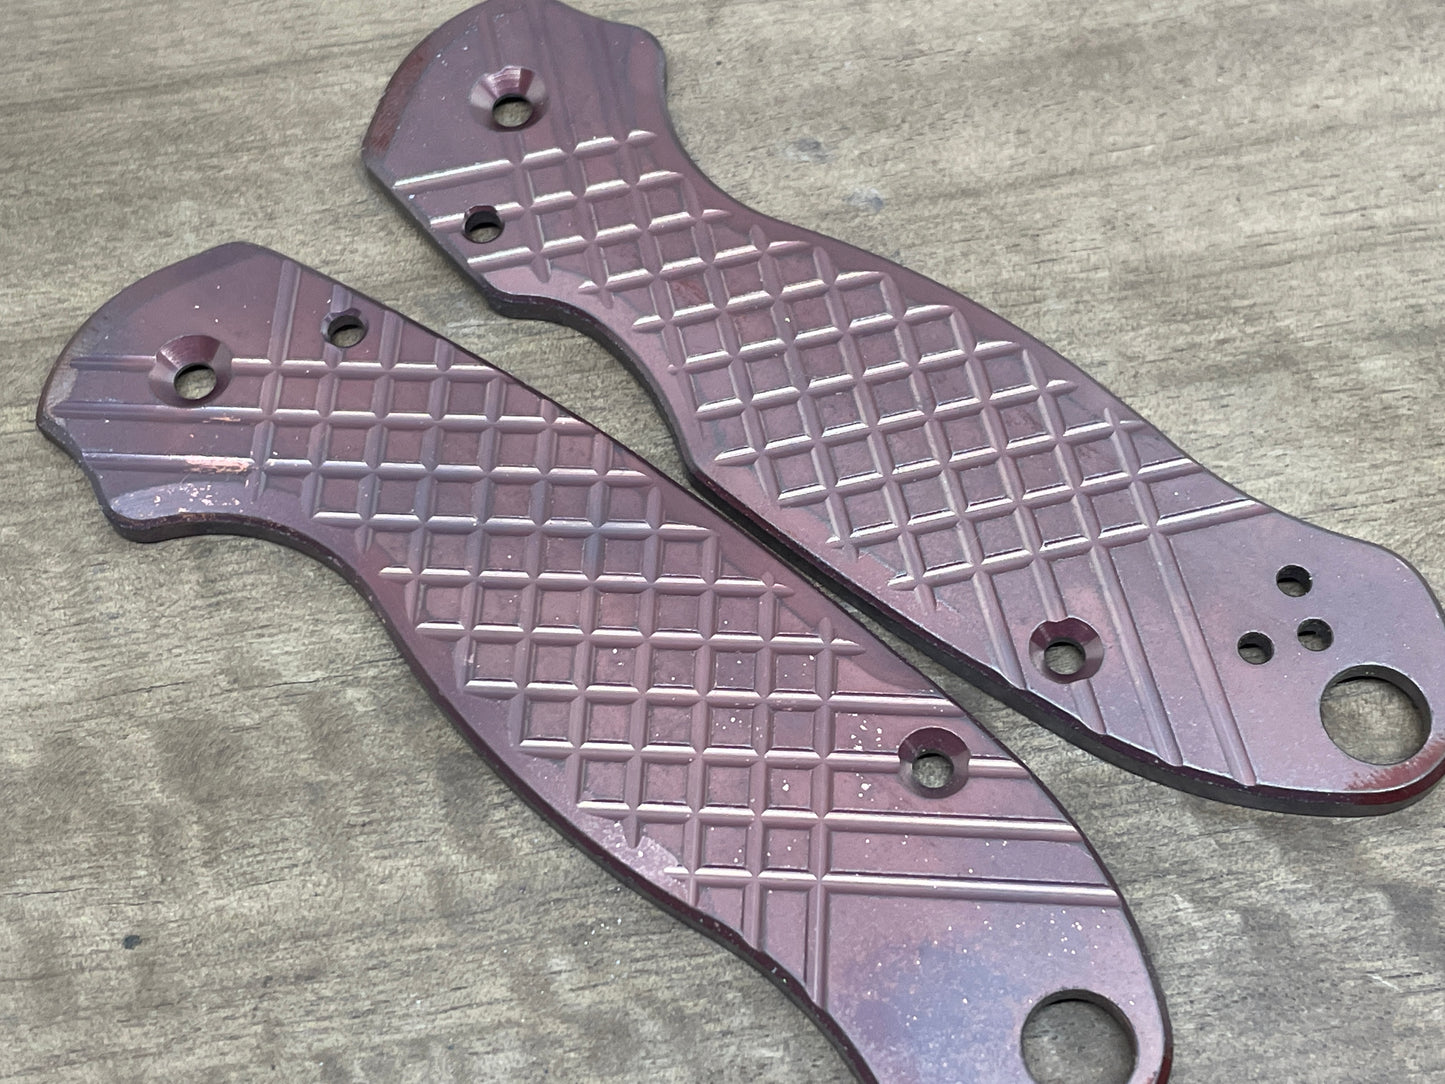 FRAG Cnc milled Dark STONE WASHED Copper Scales for Spyderco Para 3